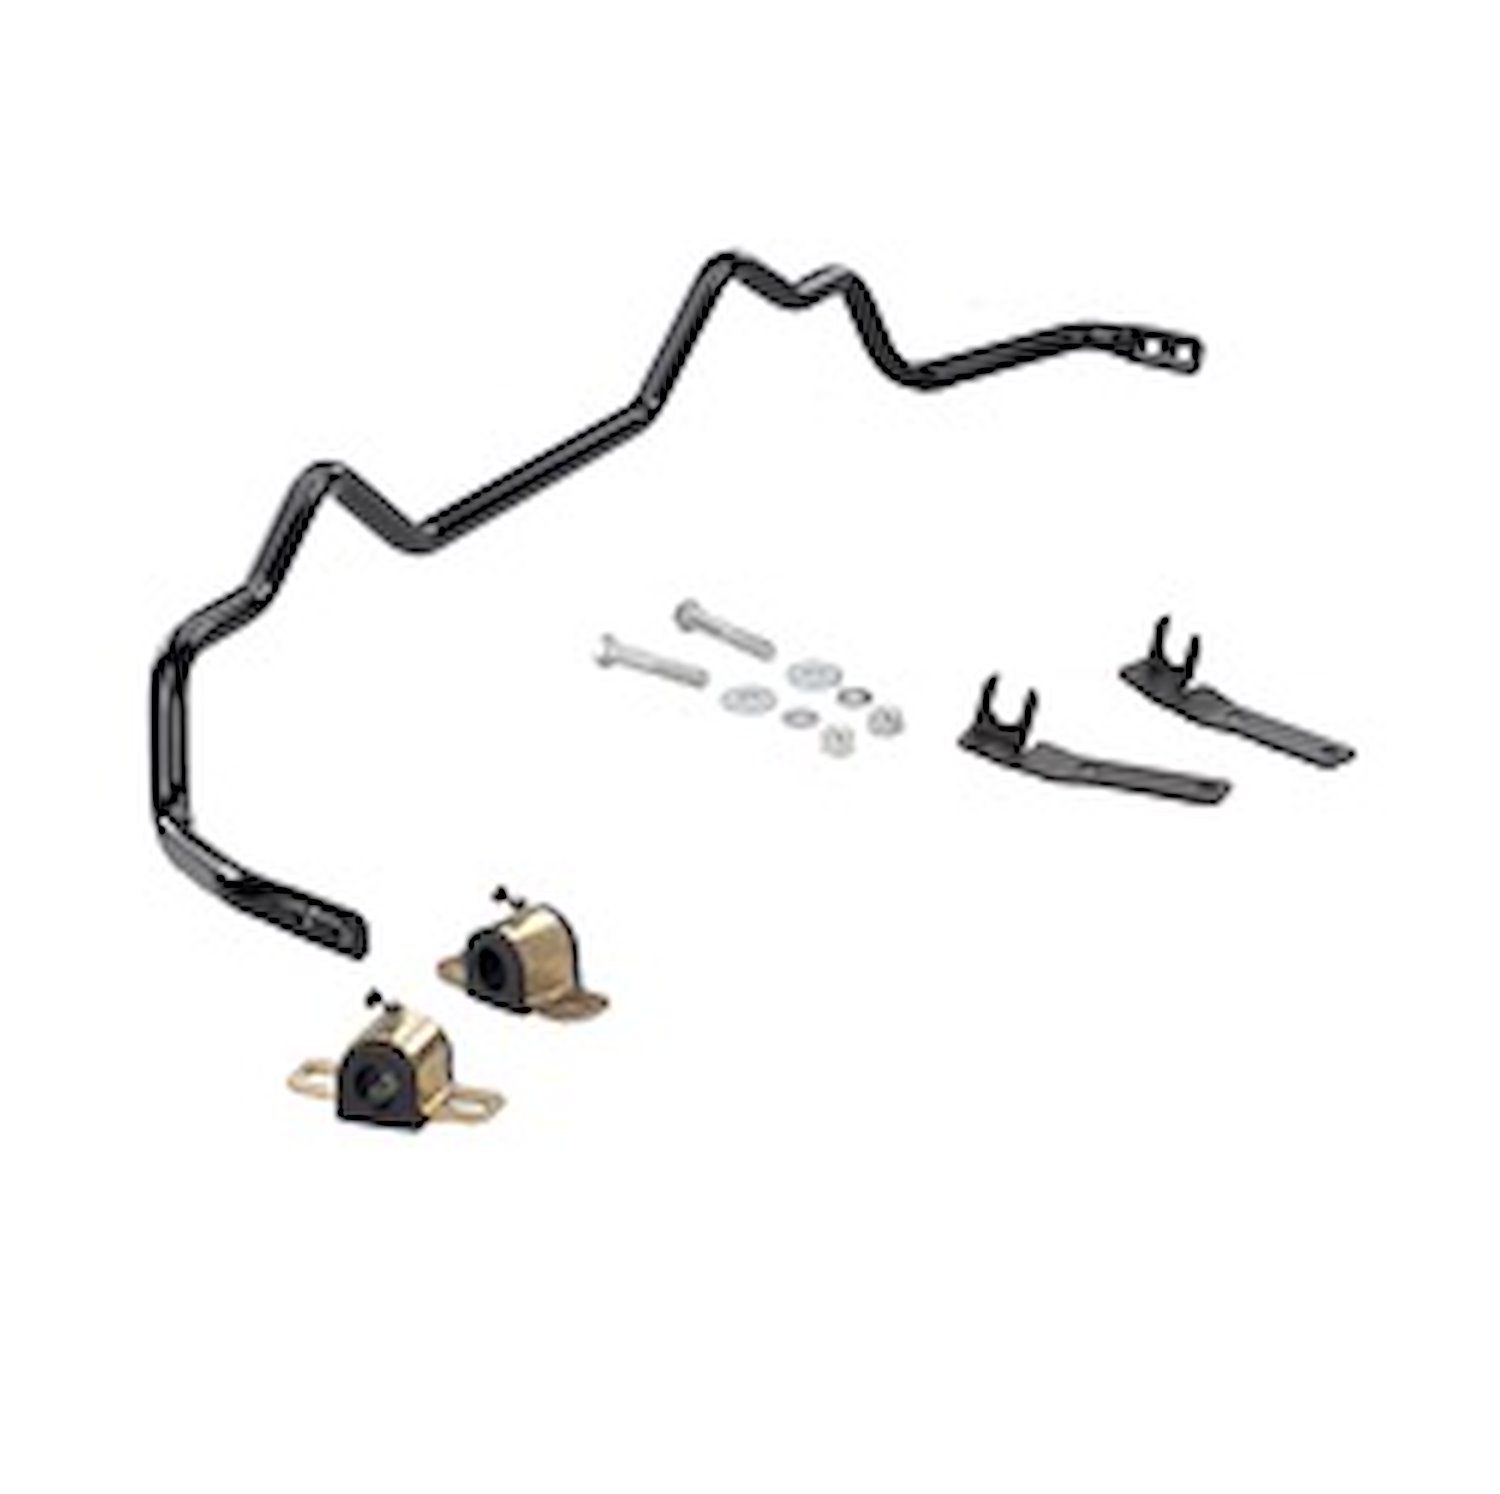 22827R 2003-2004 Audi RS6 Sport Rear Sway Bar from Hotchkis Sport Suspension